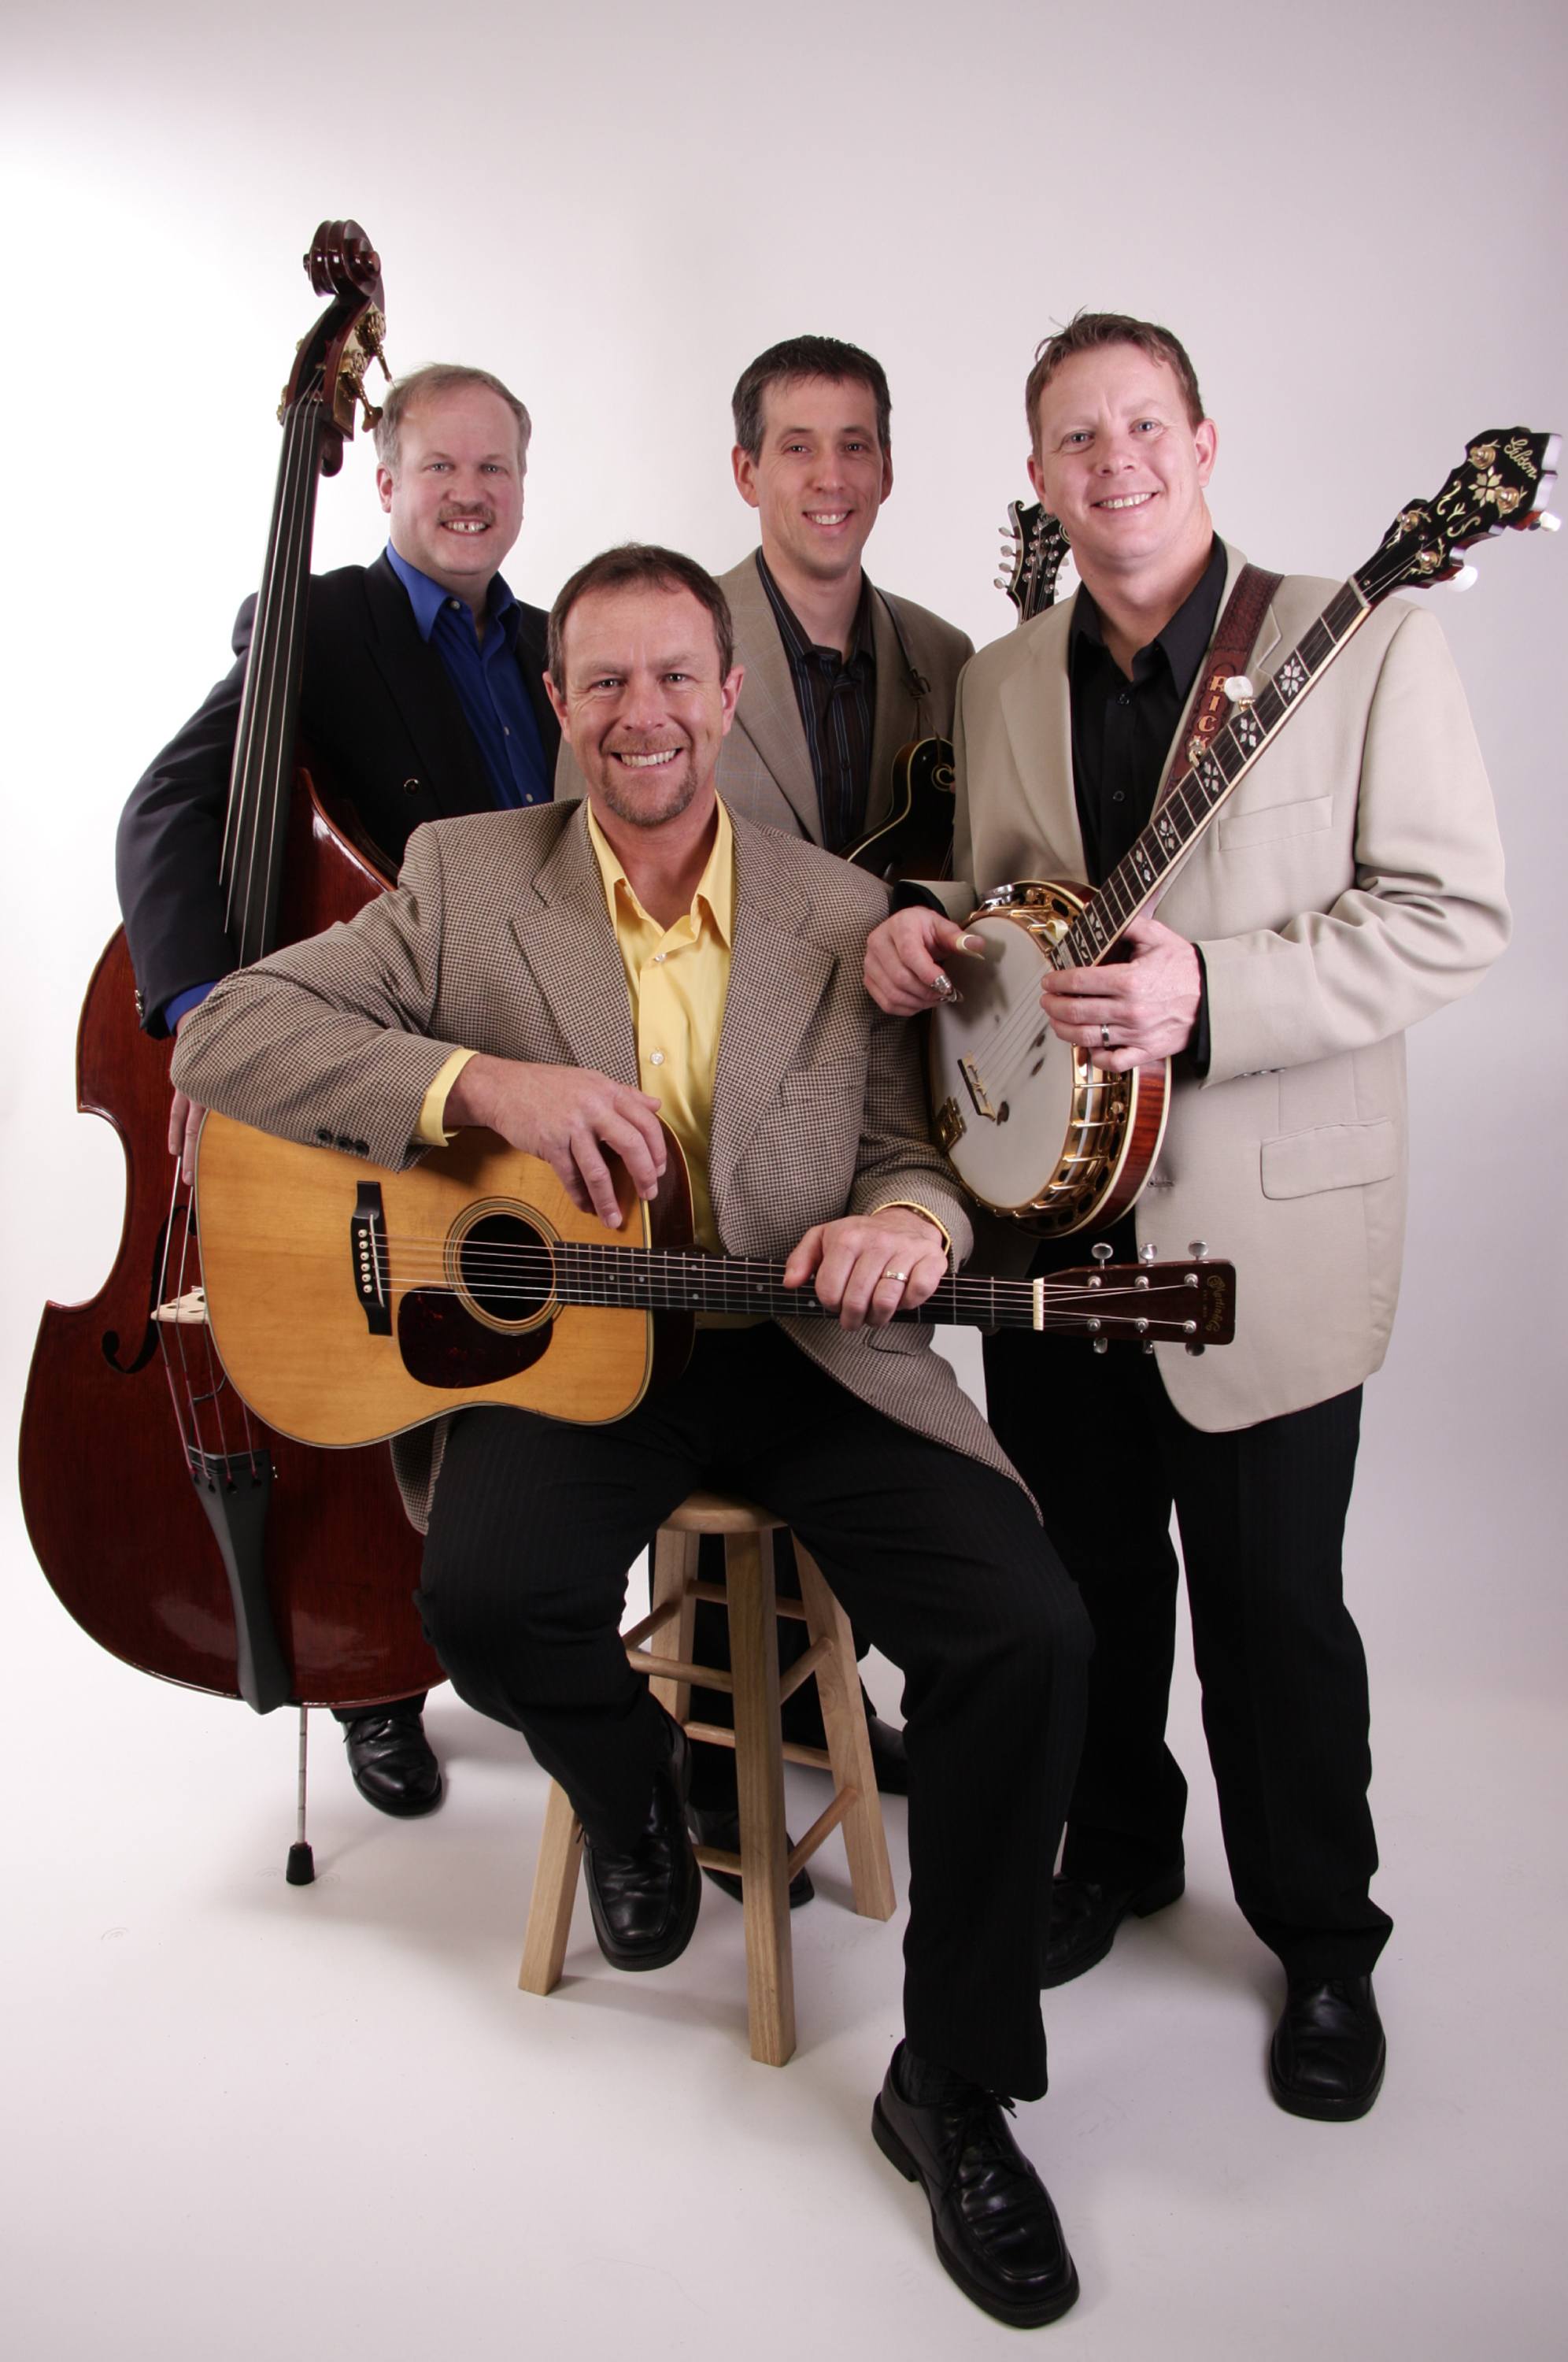 MASTERS- One of Canada’s Bluegrass band sensations The Spinney Brothers performs at the Elks Lodge on Oct. 23.